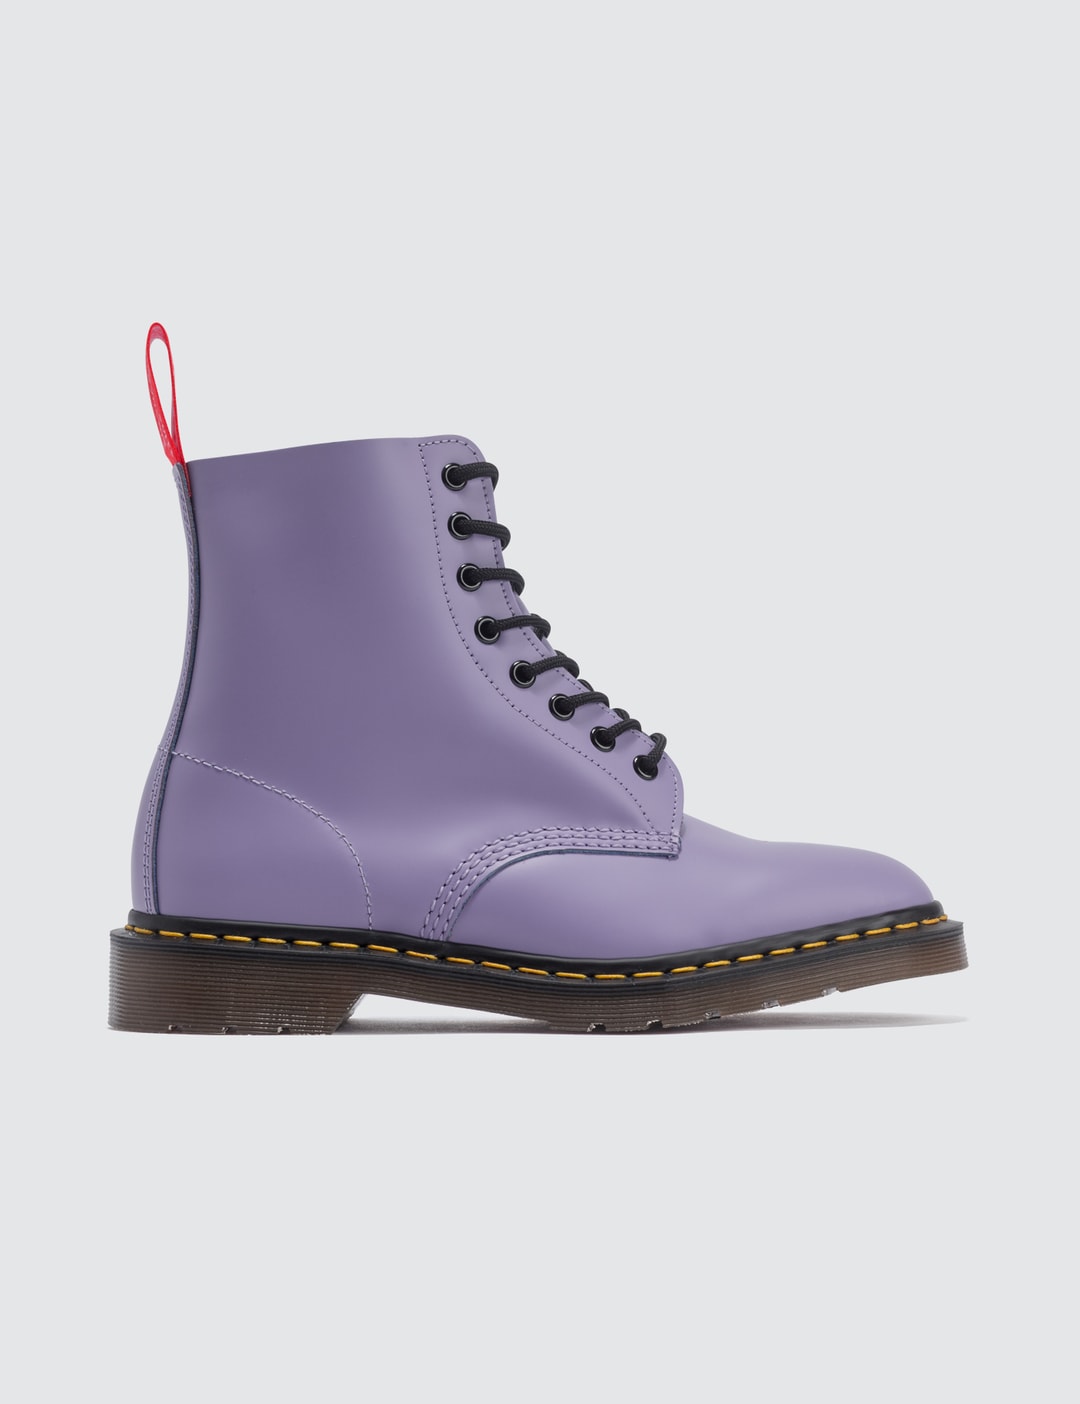 Dr. Martens - Undercover X Dr. Martens Boots | HBX - Globally Curated ...